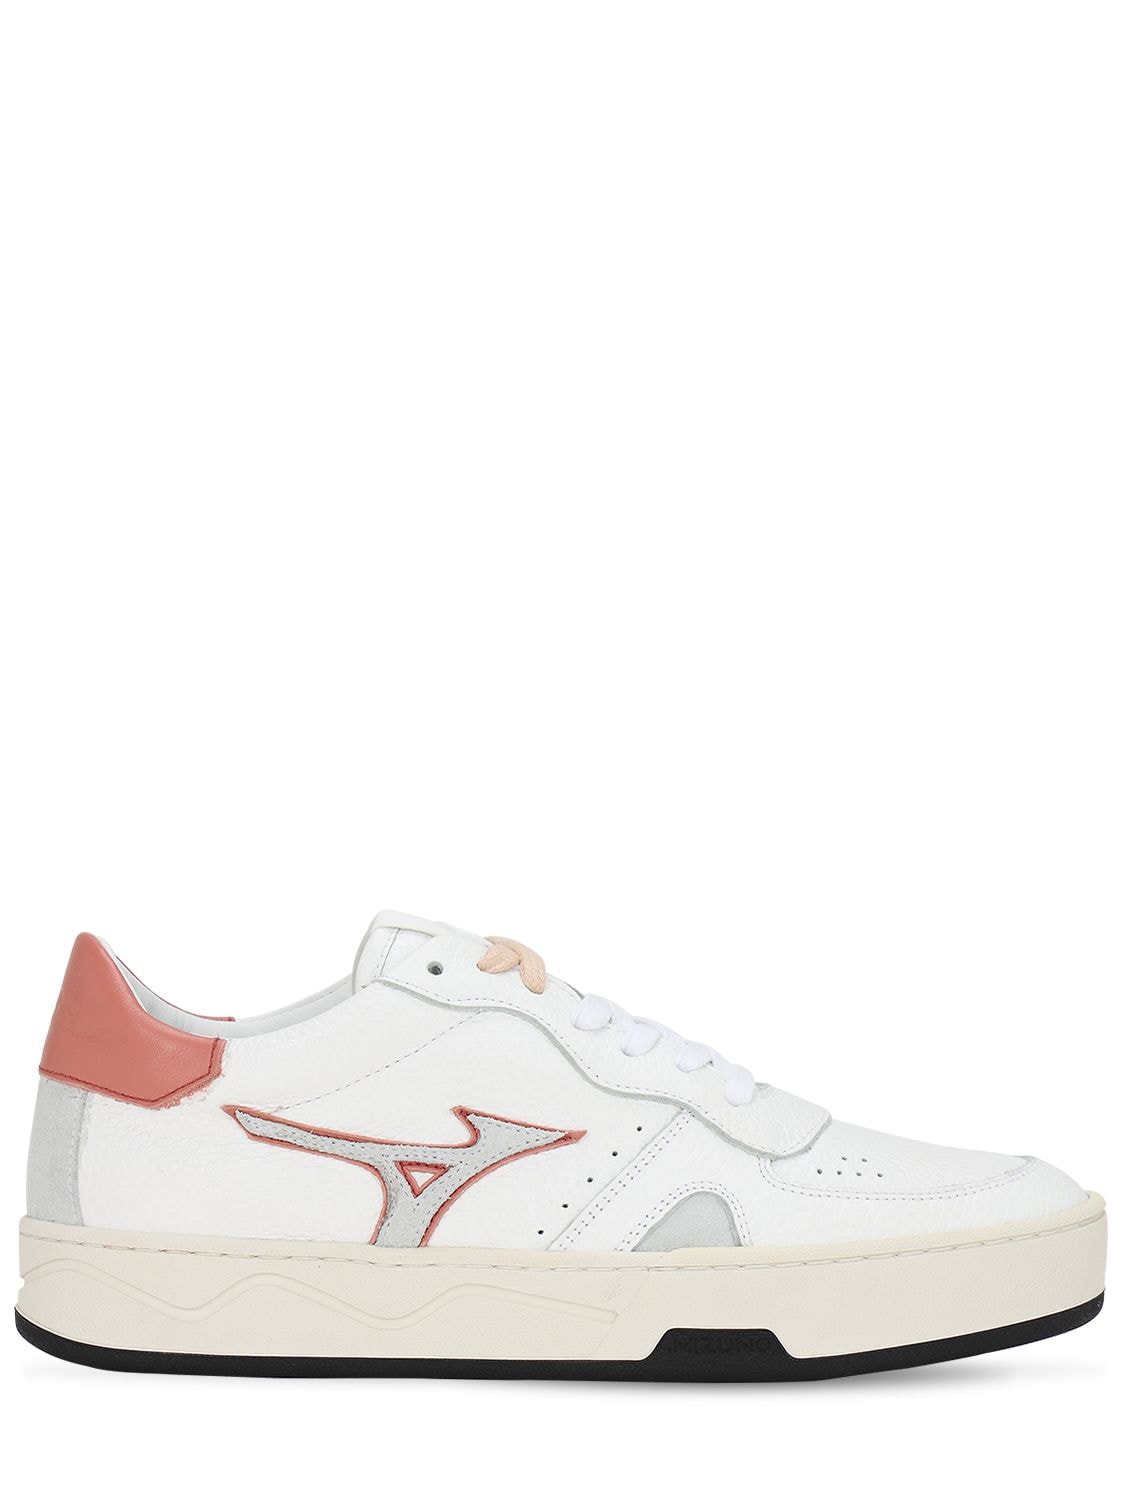 Womens Shoes Trainers Low-top trainers White Mizuno Saiph 3 Bo Leather & Suede Sneakers in White/Pink 